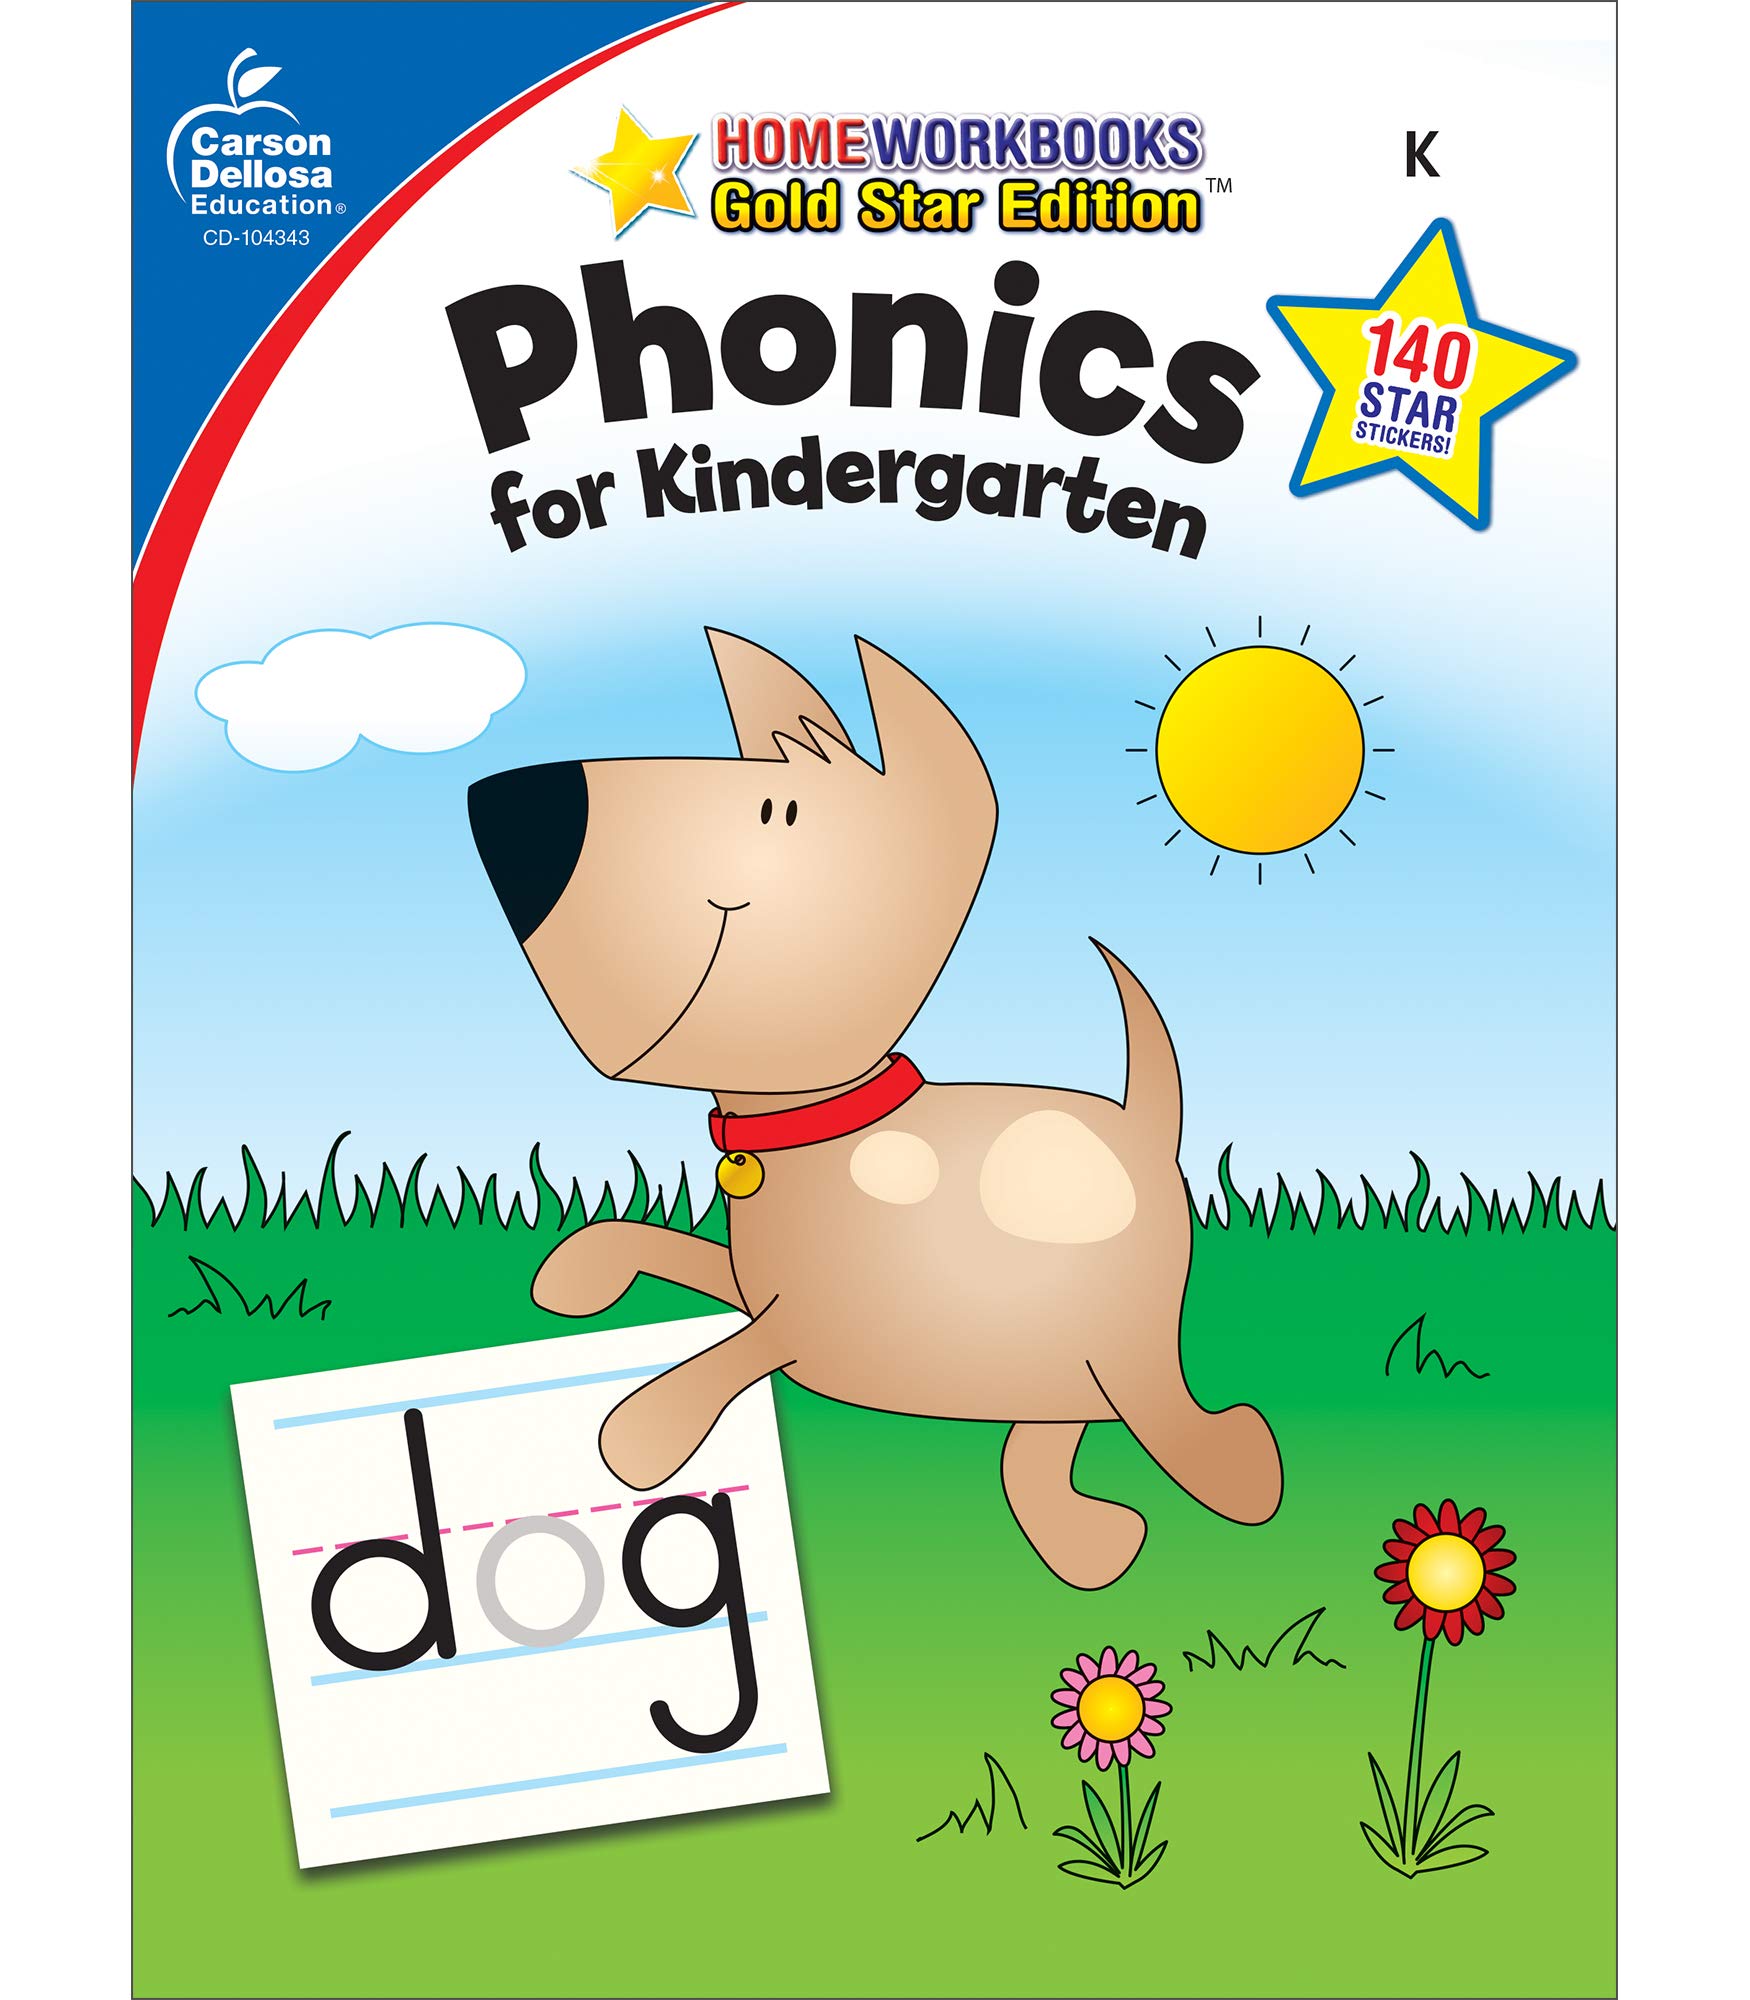 Carson Dellosa Phonics for Kindergarten Workbook—Writing Practice, Tracing Letters, Sight Words With Incentive Chart and Motivational Stickers (64 pgs)